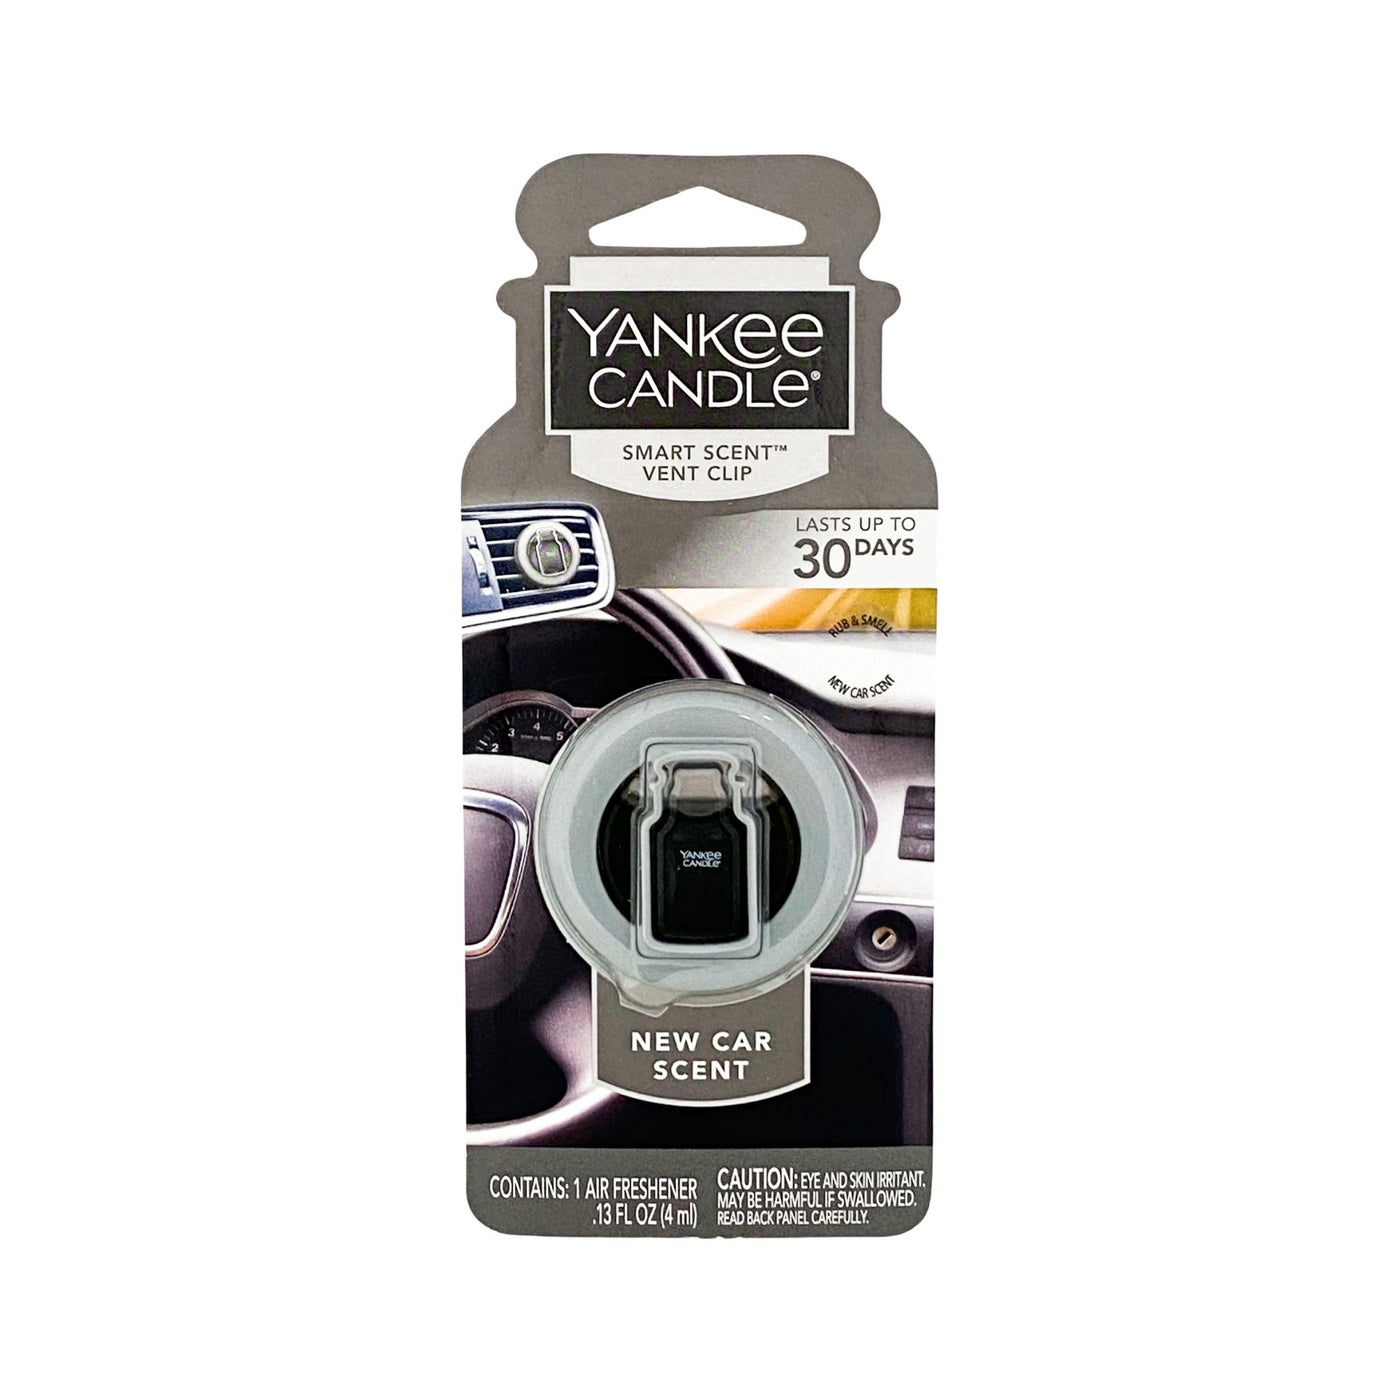 Yankee Candle Vent Clip Air Freshener - New Car Scent .13 fl oz